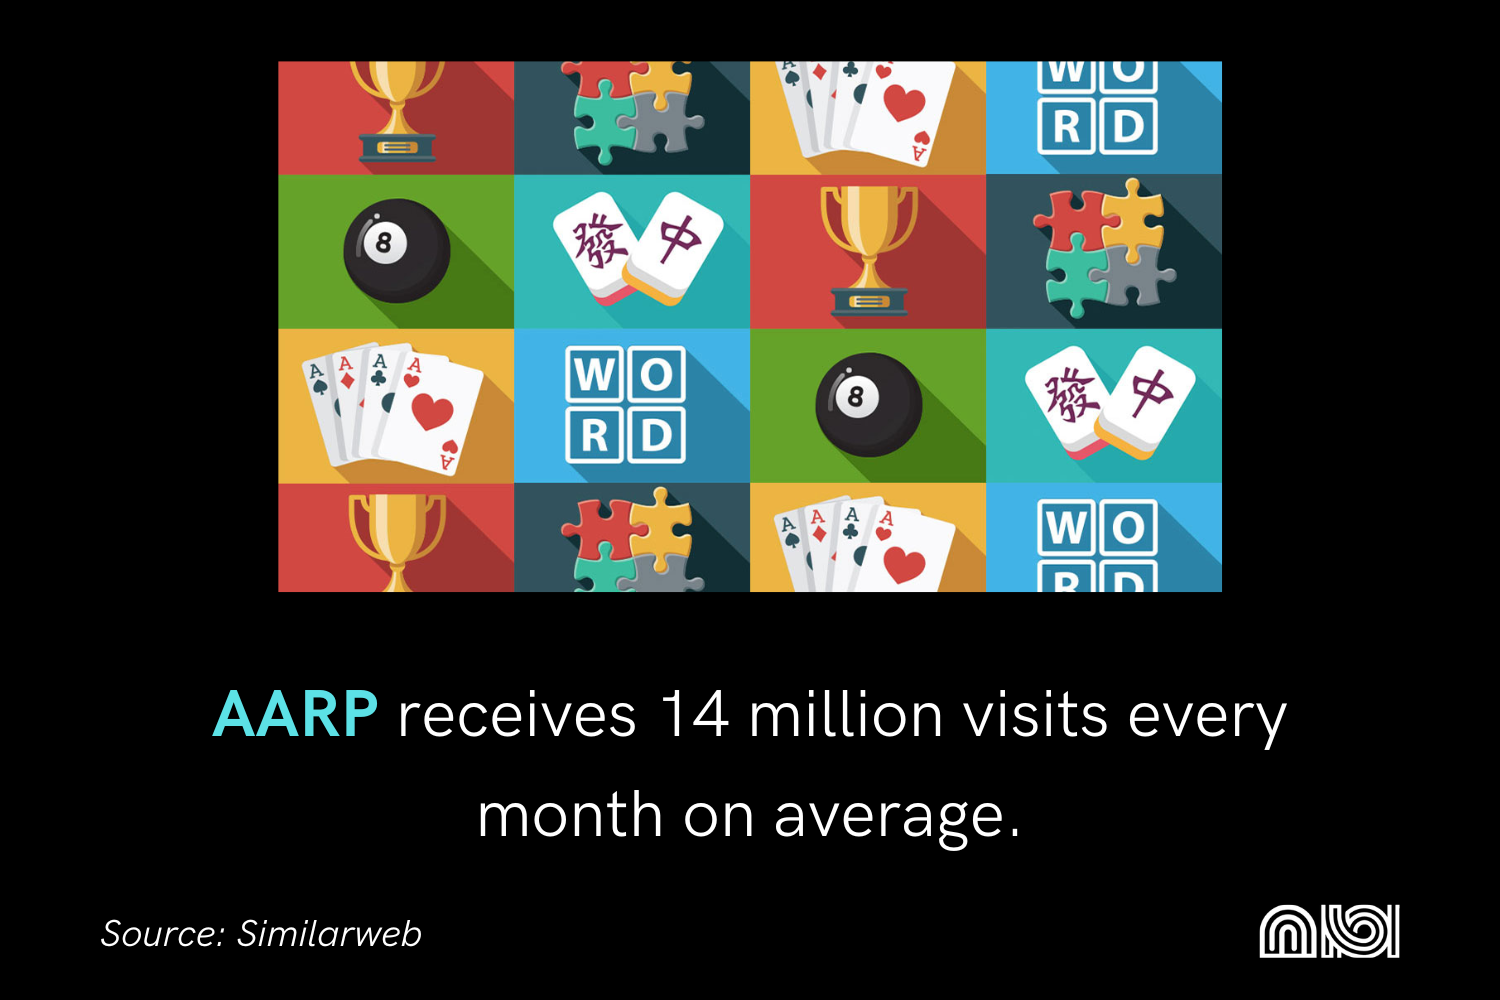 AARP averages 14 million monthly website visits, a testament to its online popularity.